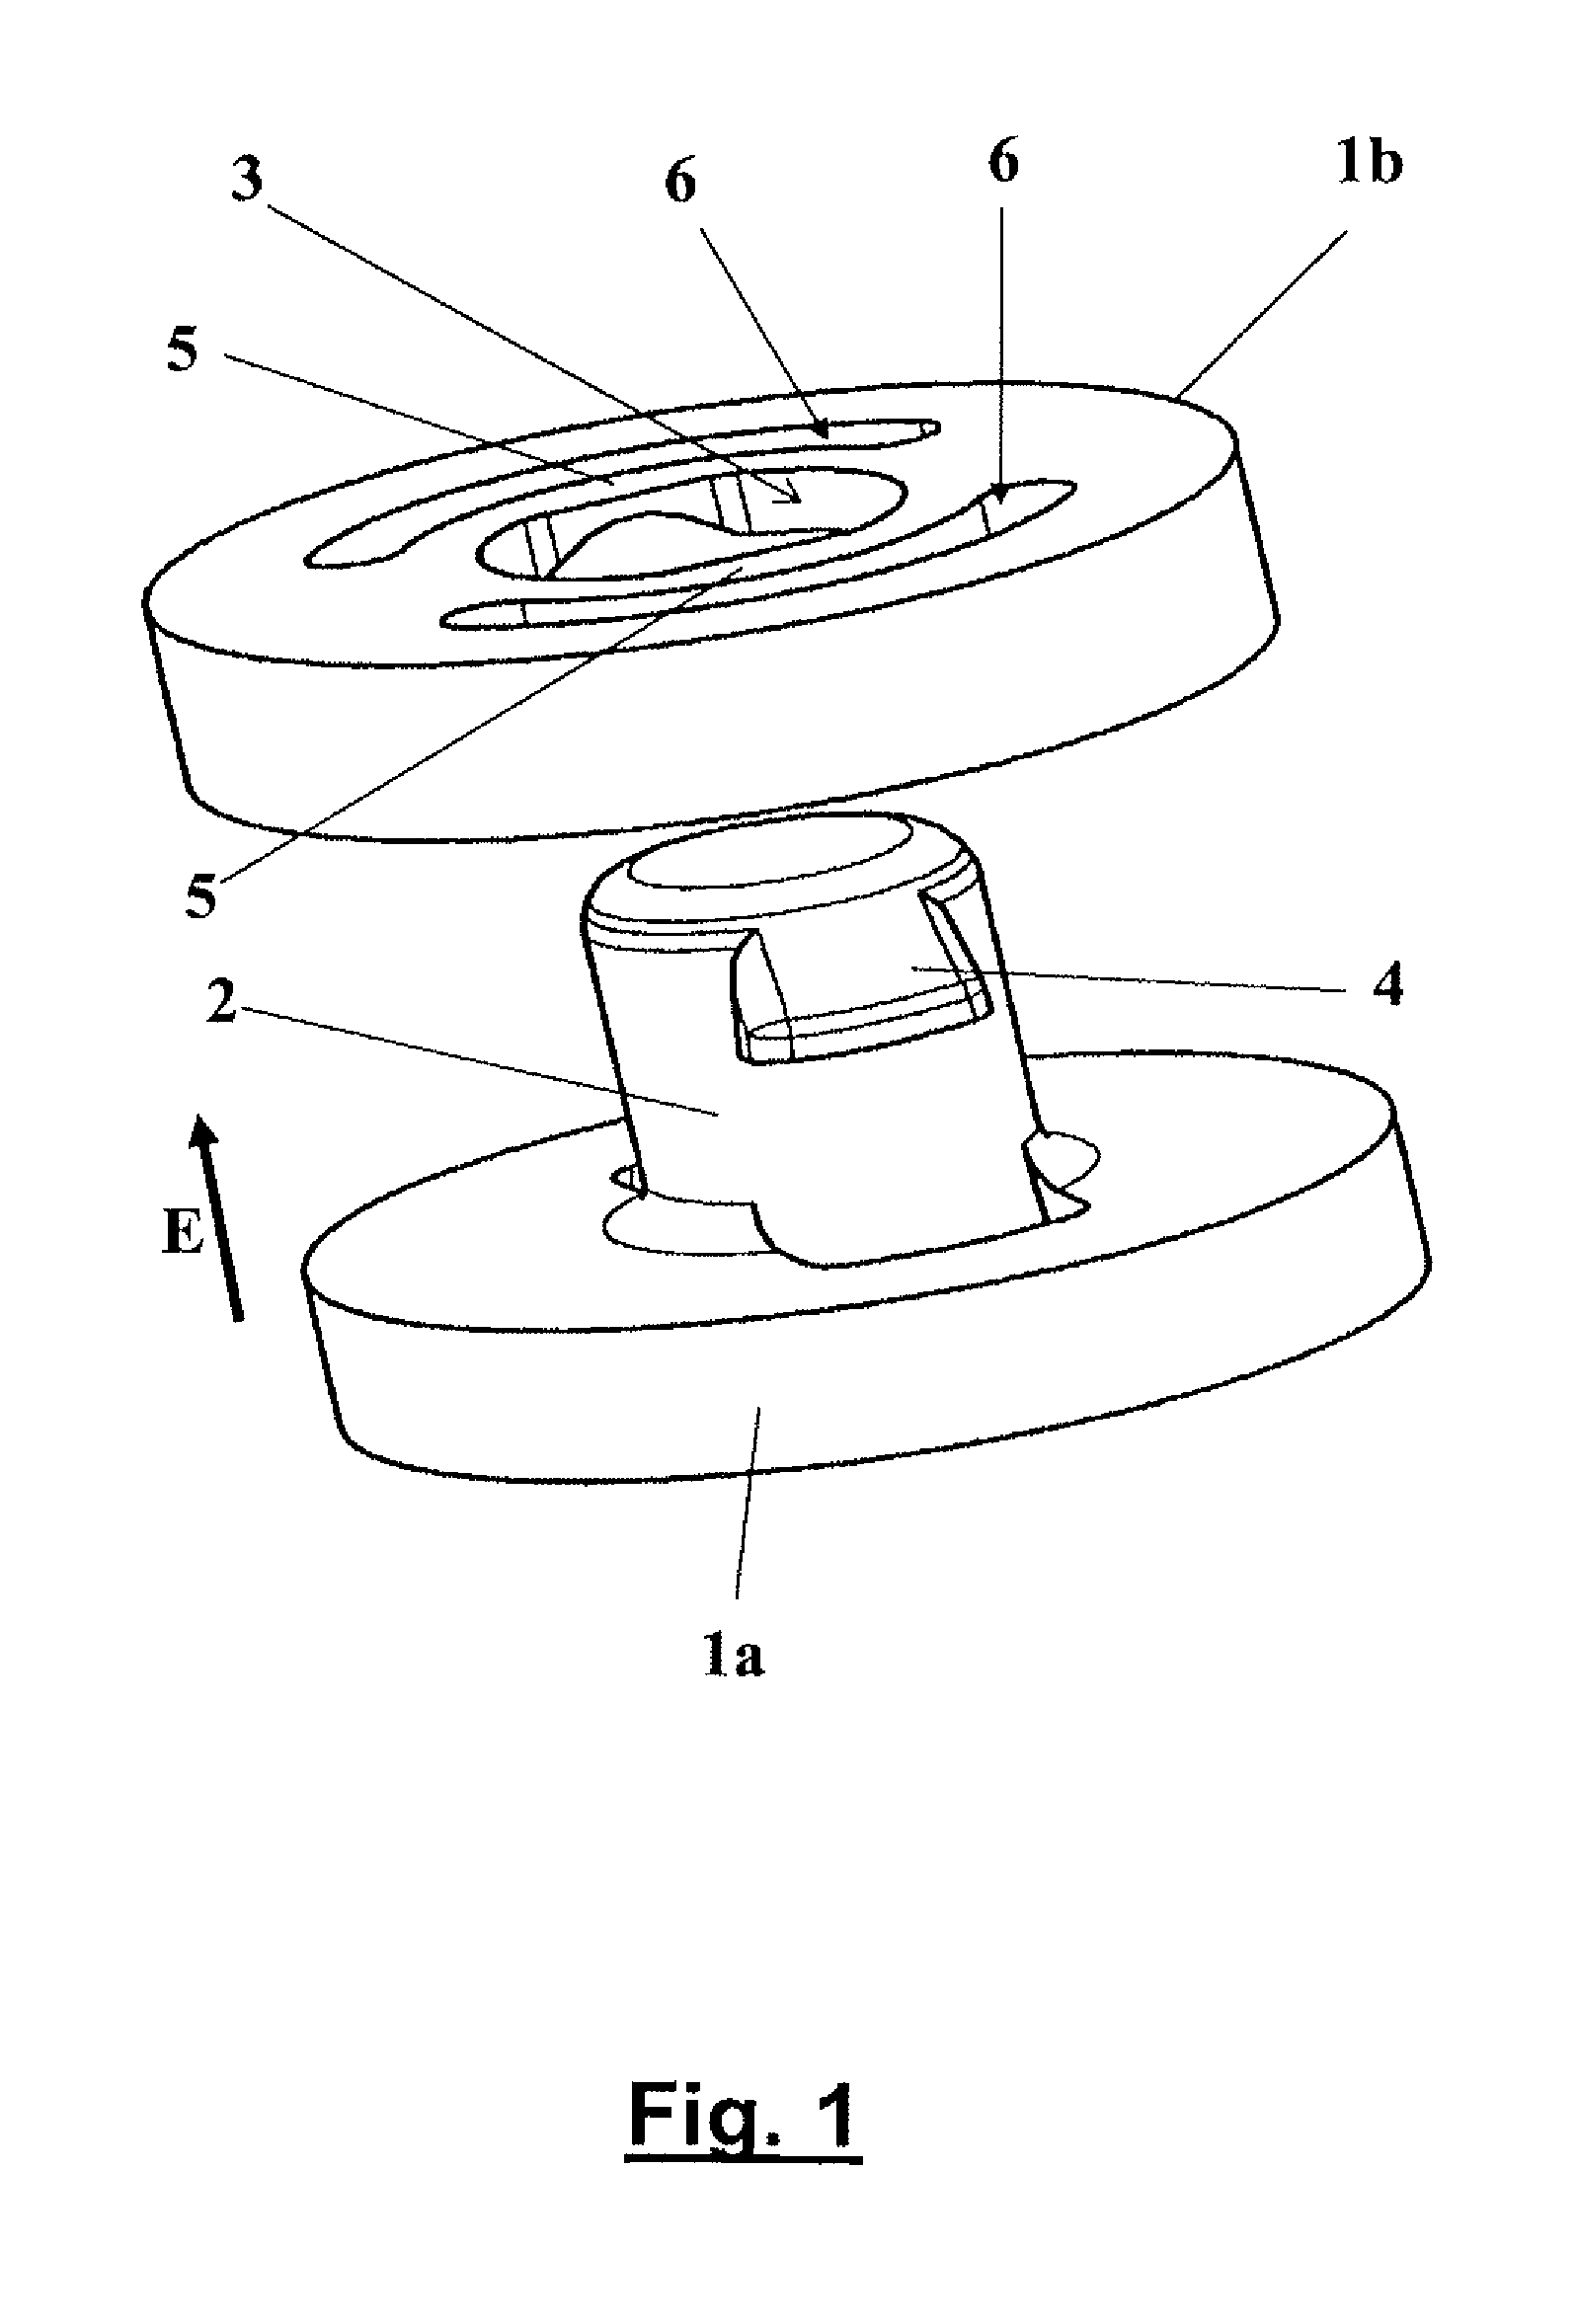 Installation element of an installed packing